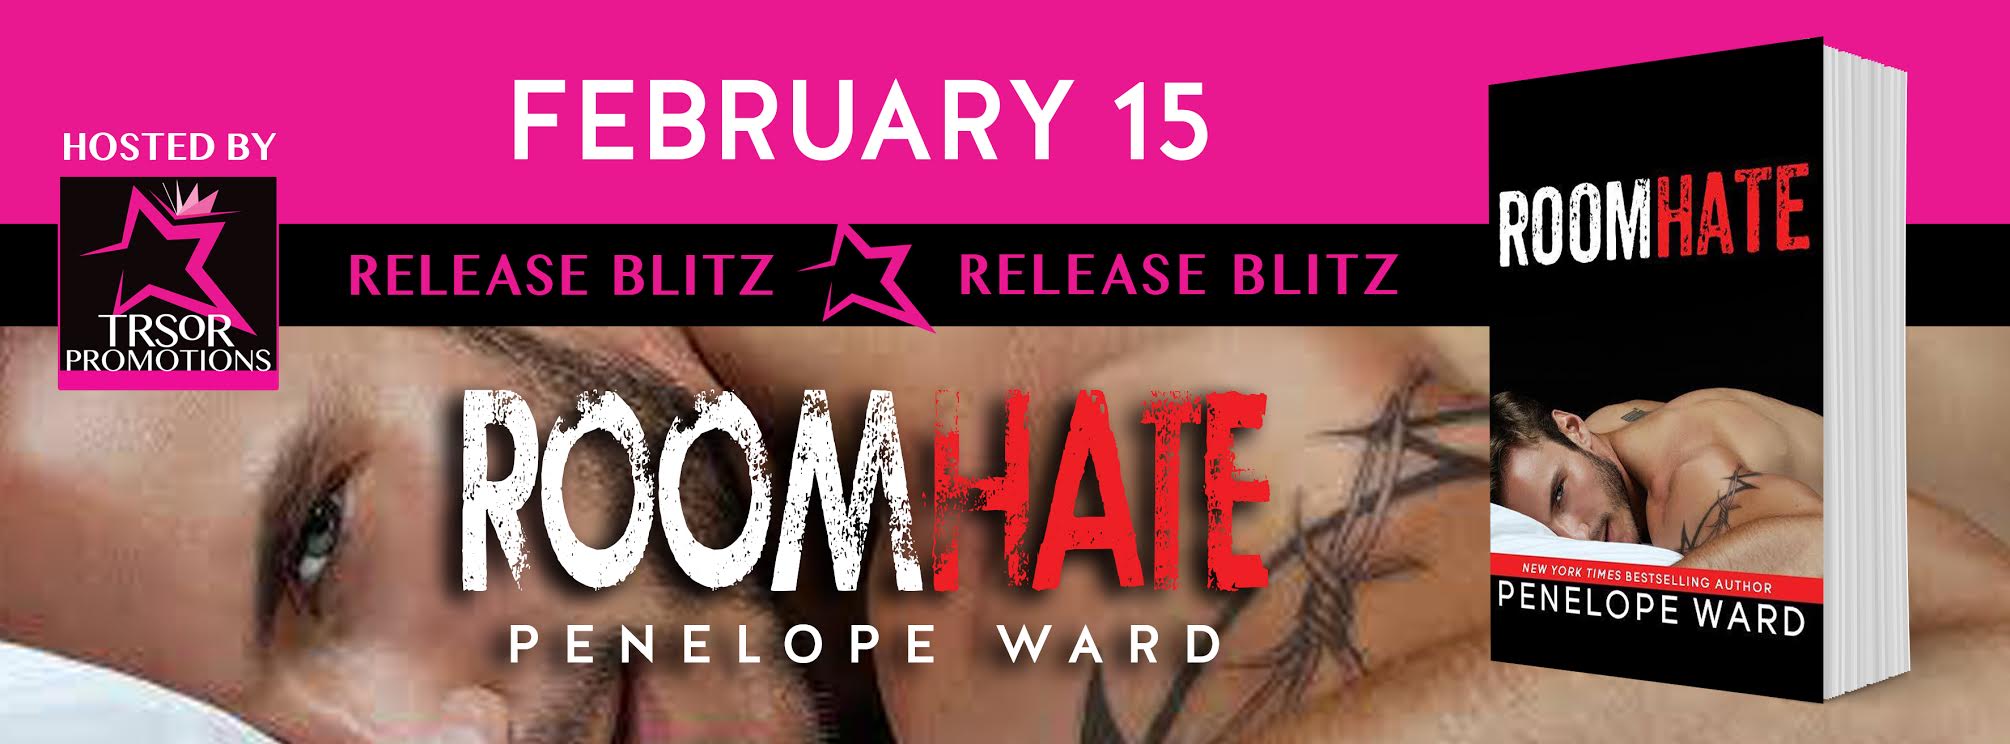 RoomHate by Penelope Ward